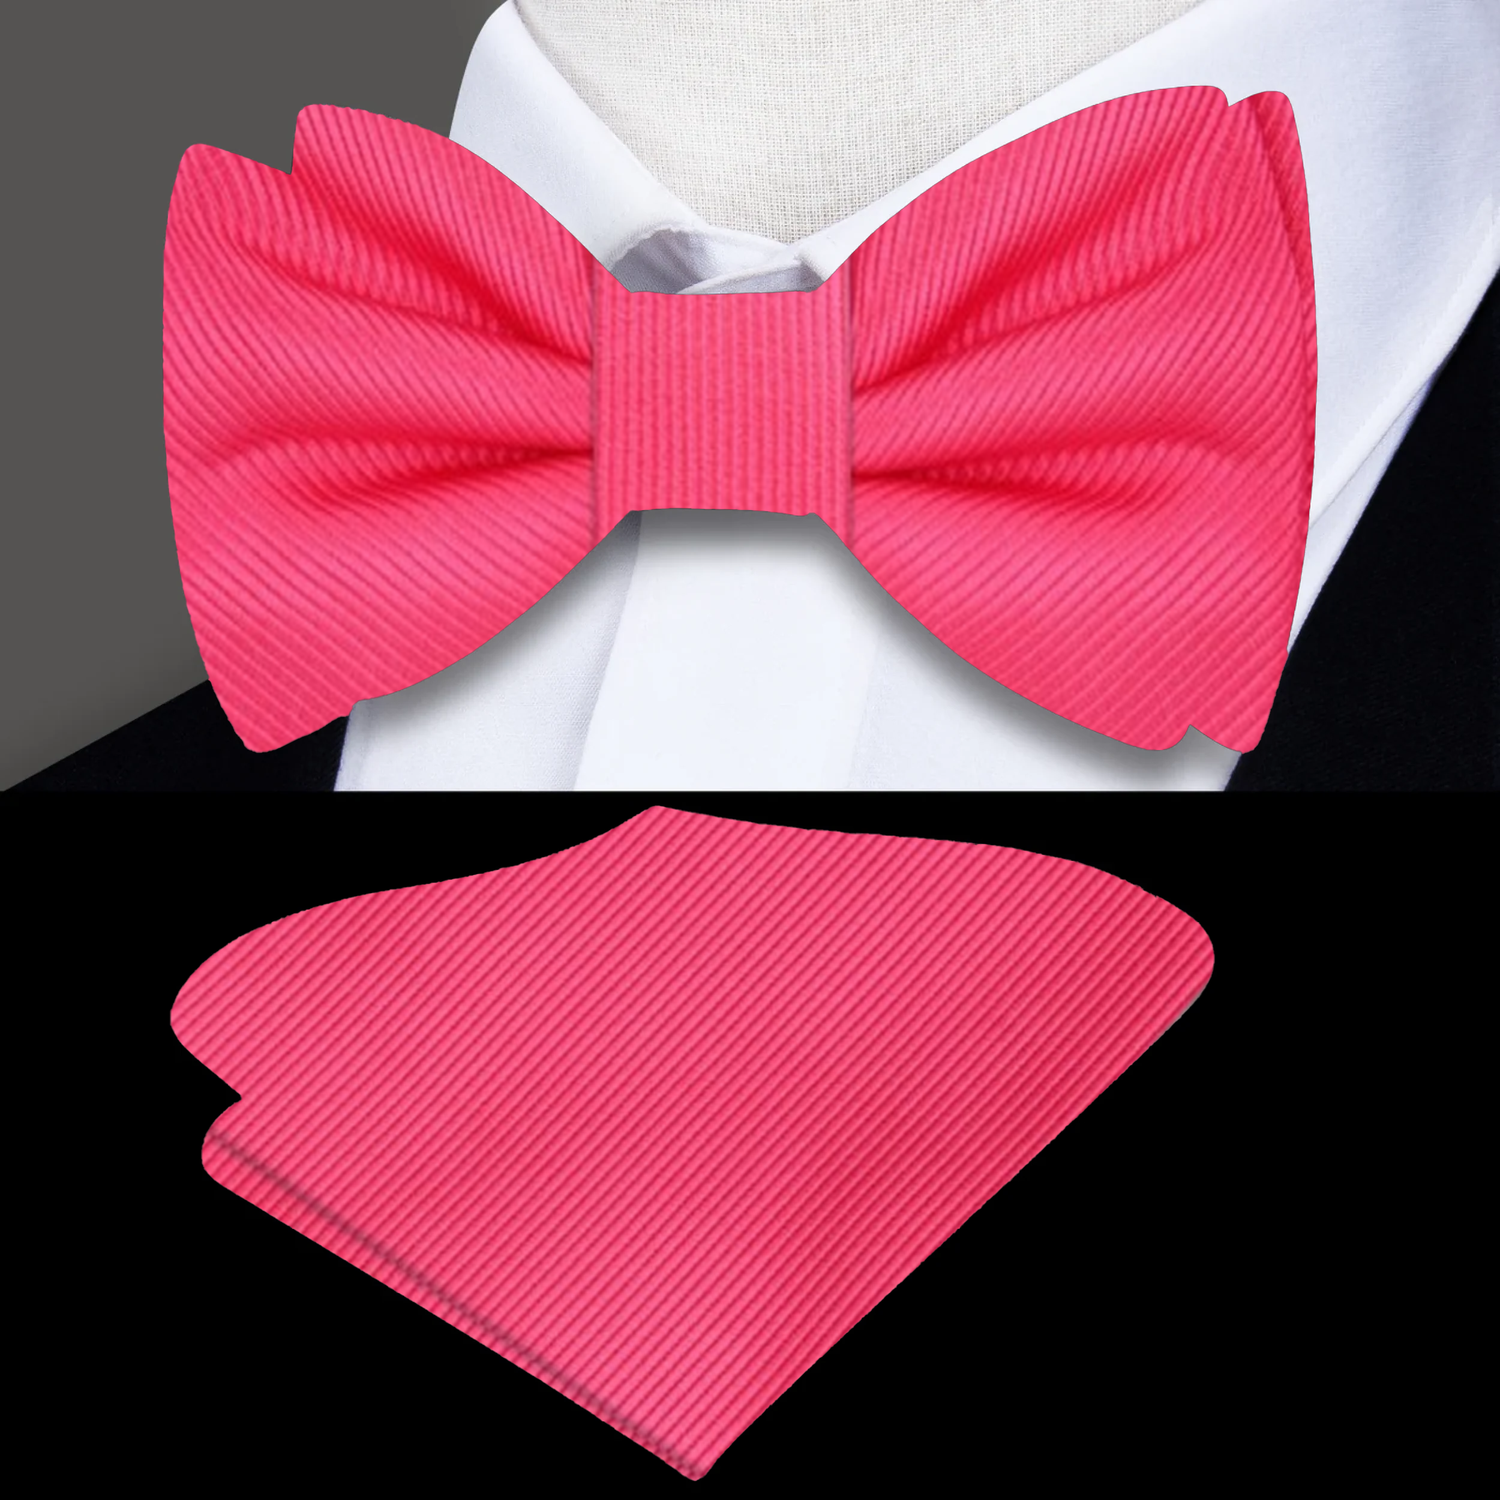 Rich Pink Lined Bow Tie and Pocket Square